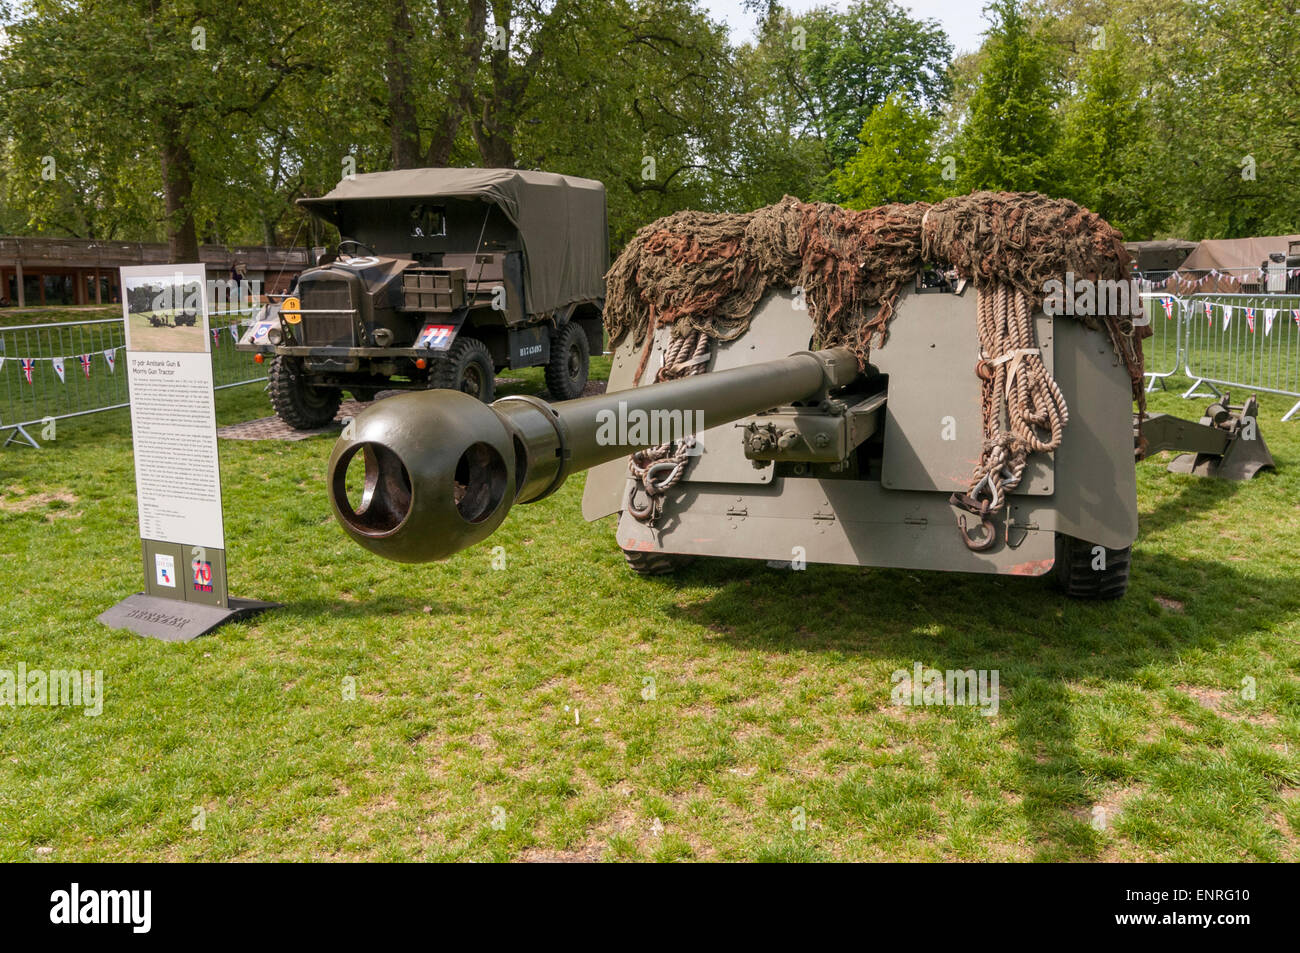 London, UK. 10 May 2015. A 17 pounder antitank gun and Morris gun tractor are two of the items on display to the public in a special exhibition of wartime hardware in St. James's Park which was part of the capital's VE Day 70th anniversary celebrations. Credit:  Stephen Chung / Alamy Live News Stock Photo